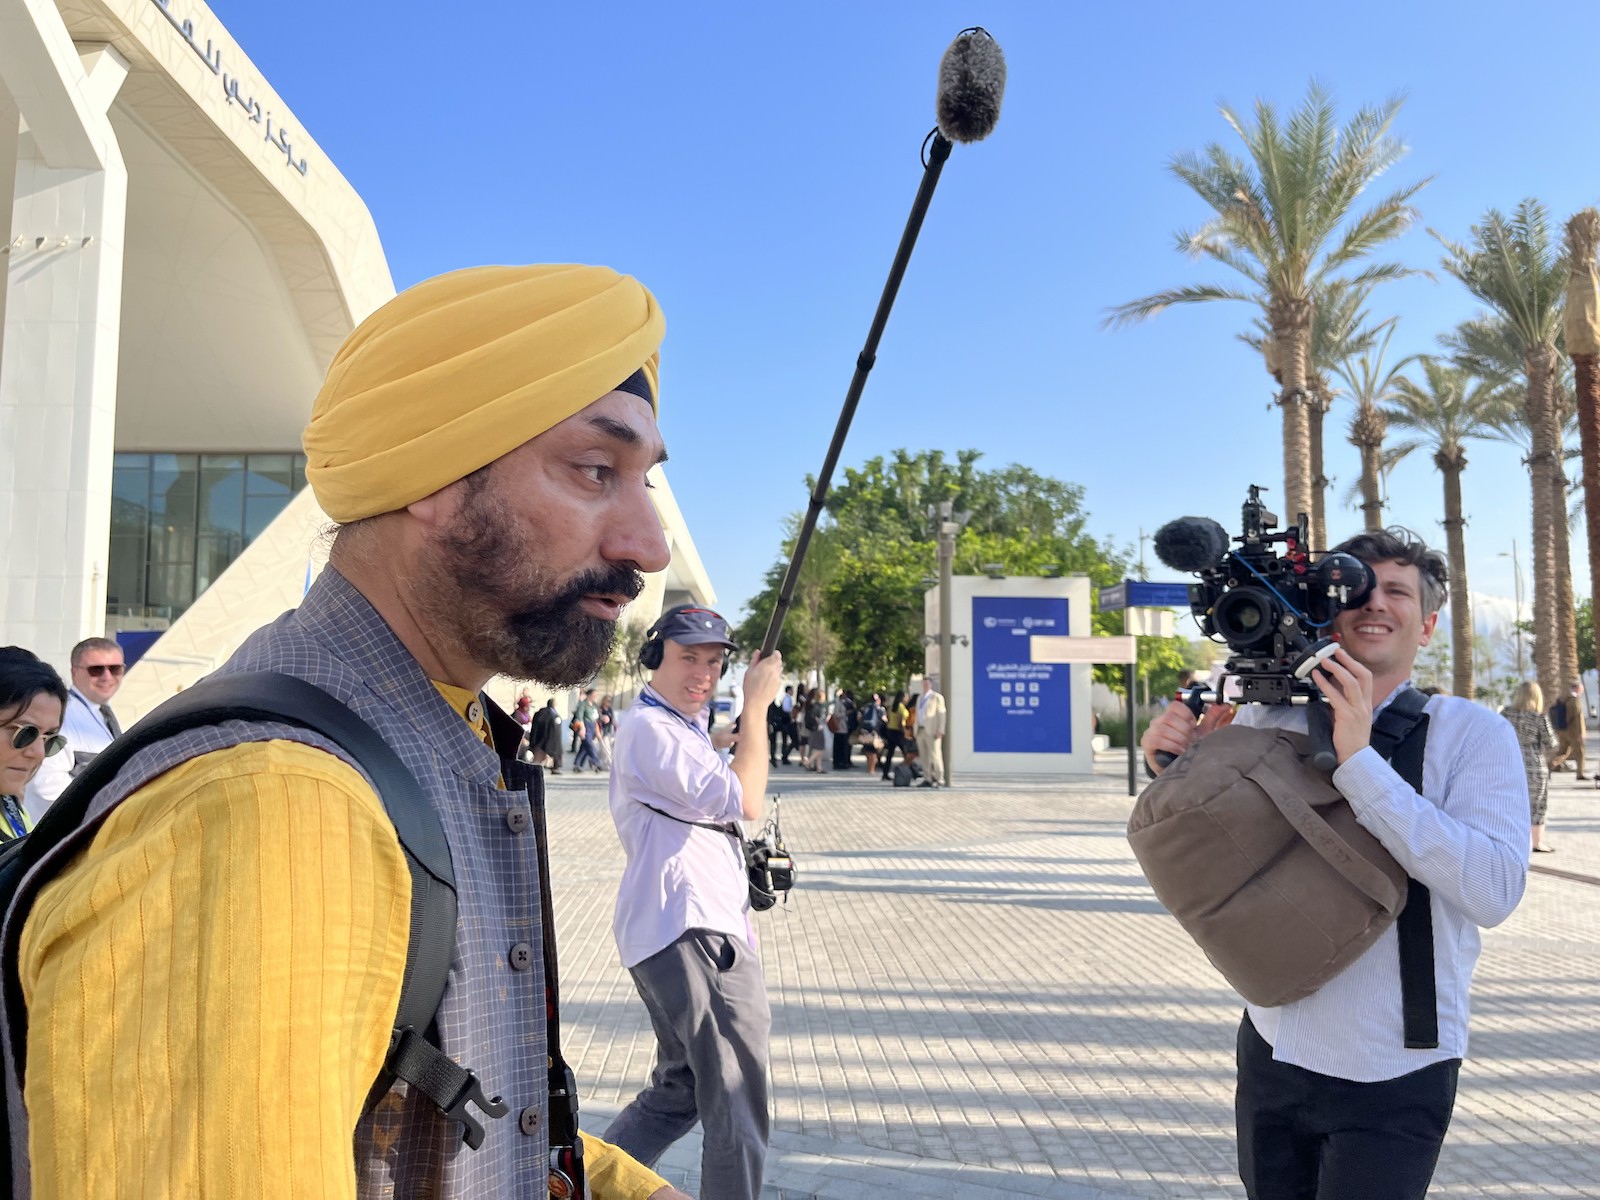 A man in a yellow turban and yellow shirt walks under a boom mic while another person films him